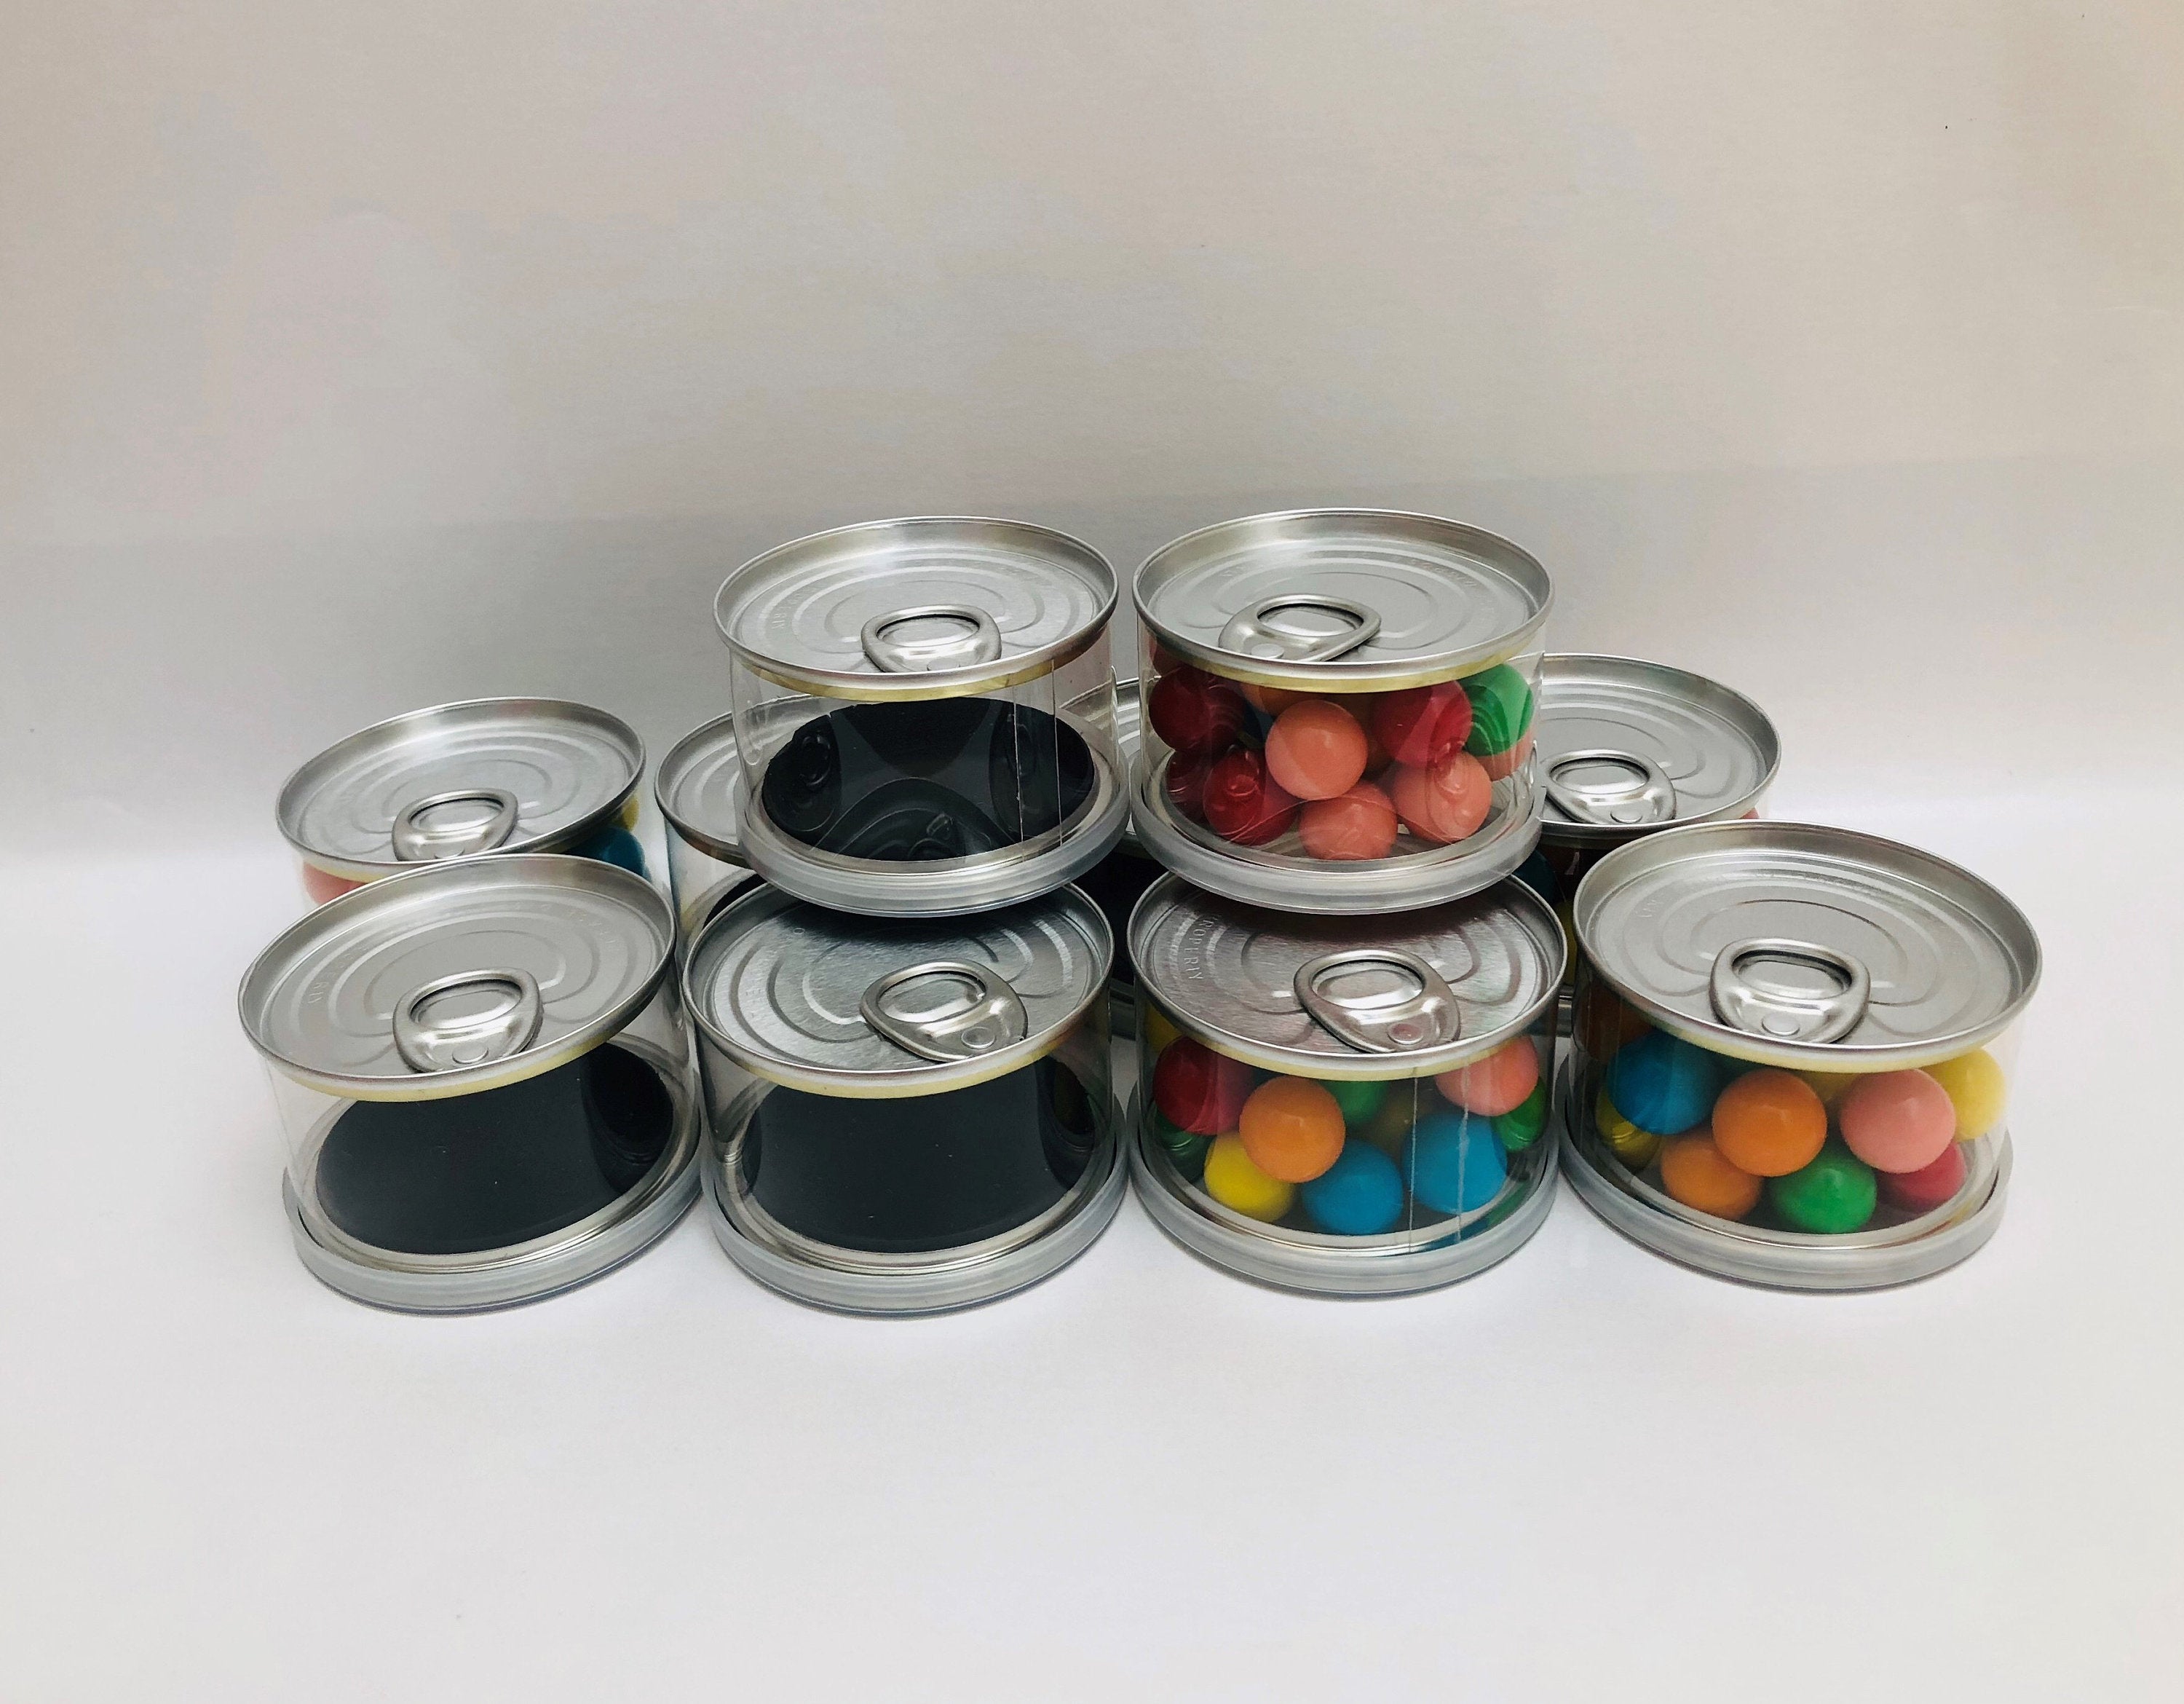 Unique Canning Look Alike Boxes, Transparent Round Plastic Tin Boxes